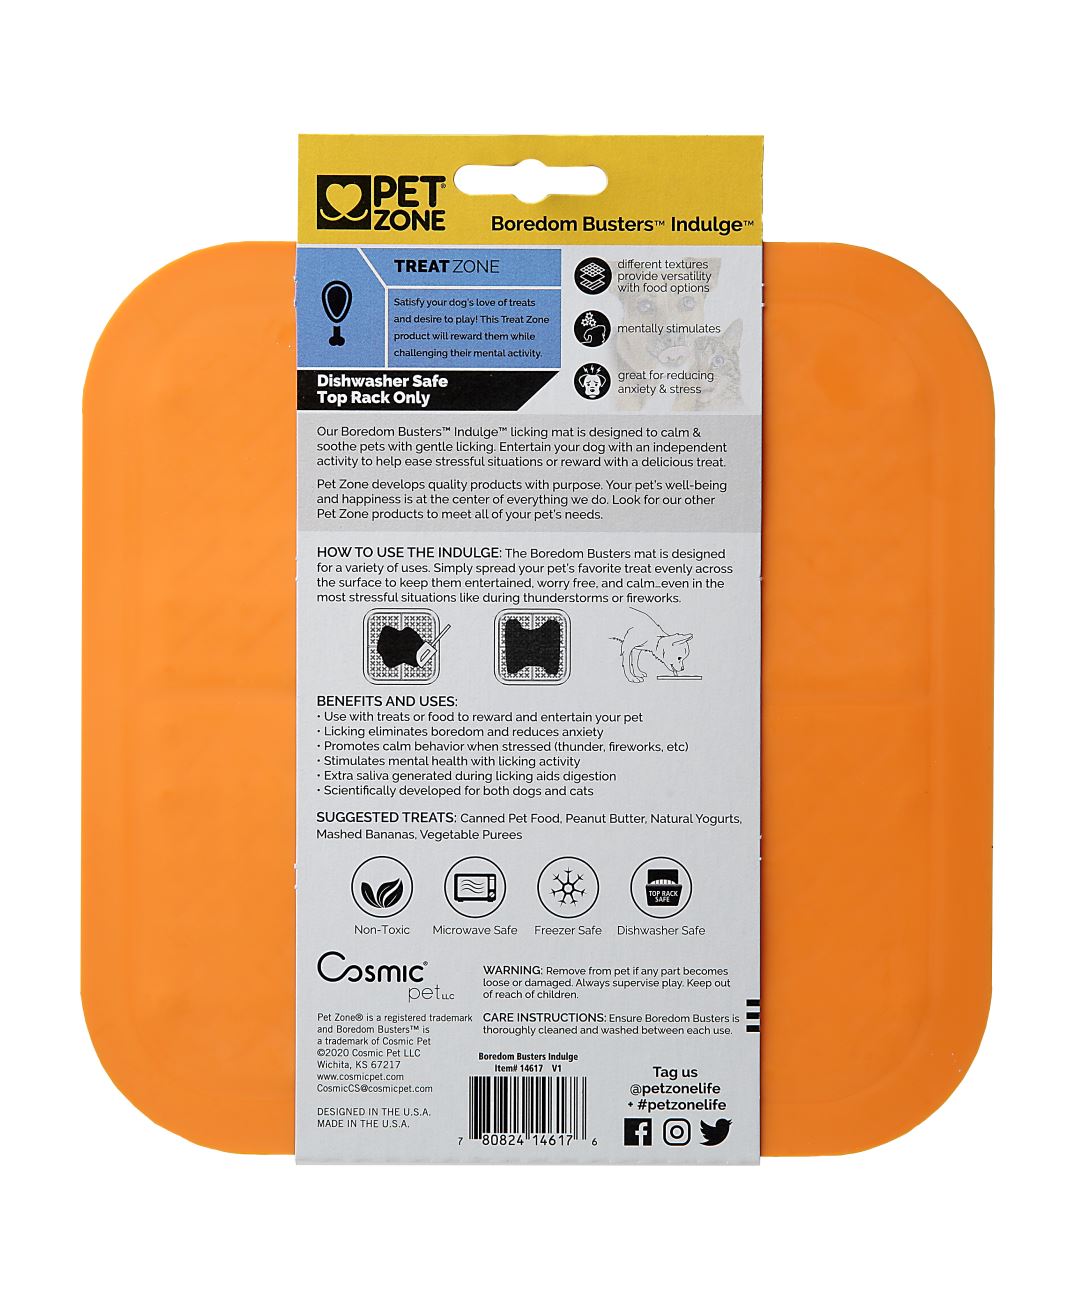 Pet Zone Boredom Buster Relax Lick Mat for Cats and Dogs 